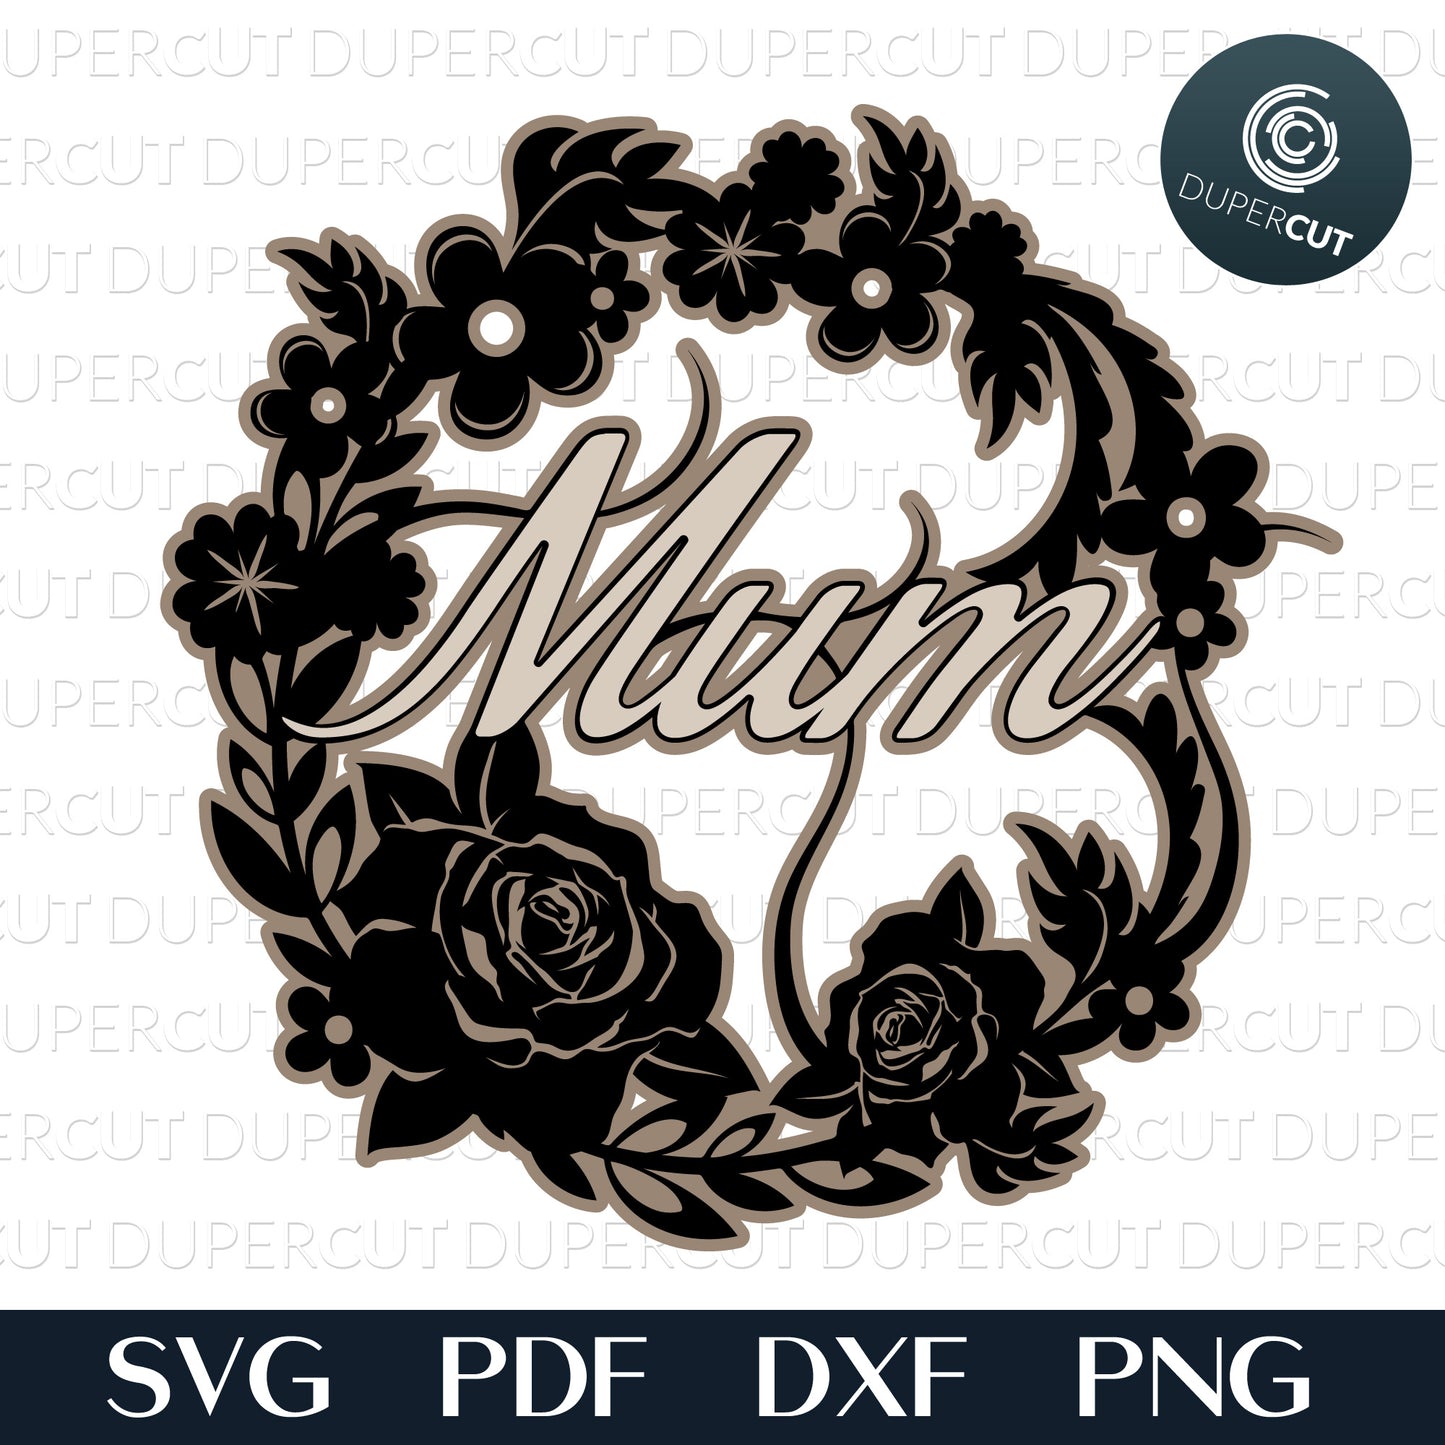 Layered laser files. Mum floral wreath, DIY Mother's Day gift. SVG JPEG DXF files. Template for paper cutting, laser, print on demand. For use with Cricut, Glowforge, Silhouette Cameo, CNC machines. Personal or commercial license.